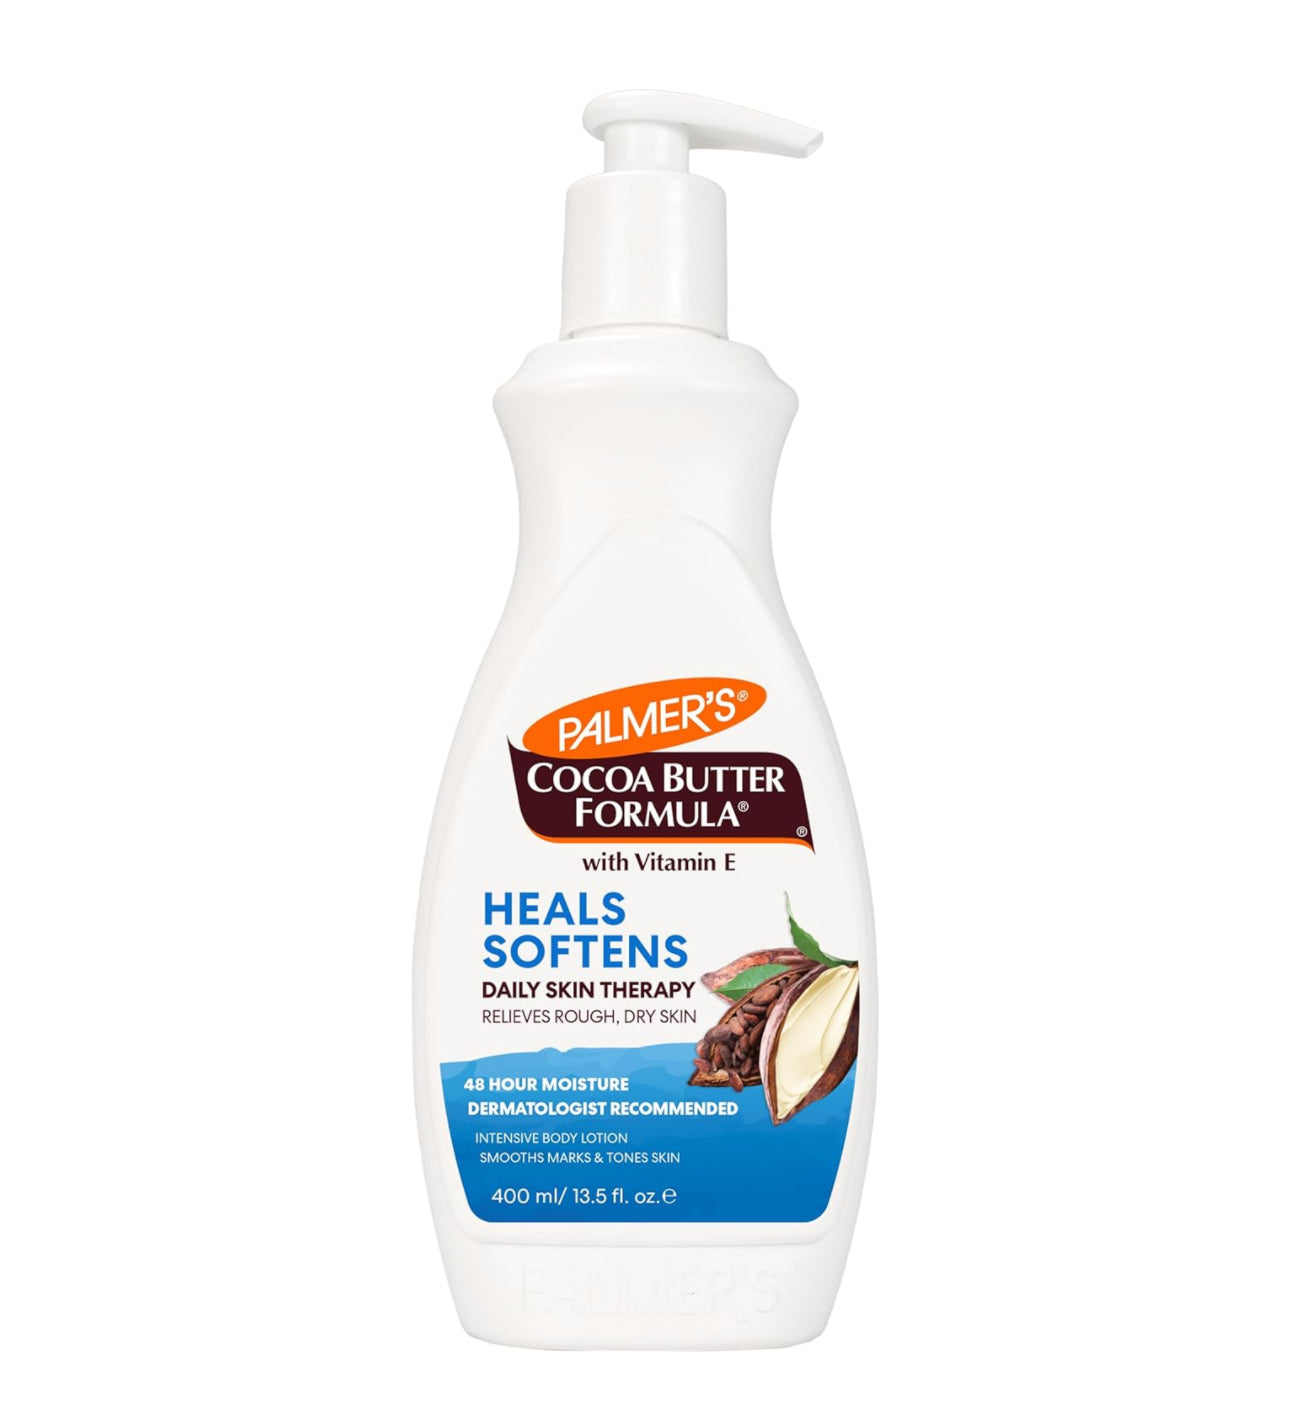 PALMER’S COCOA BUTTER FORMULA HEALS SOFTENS INTENSIVE BODY LOTION